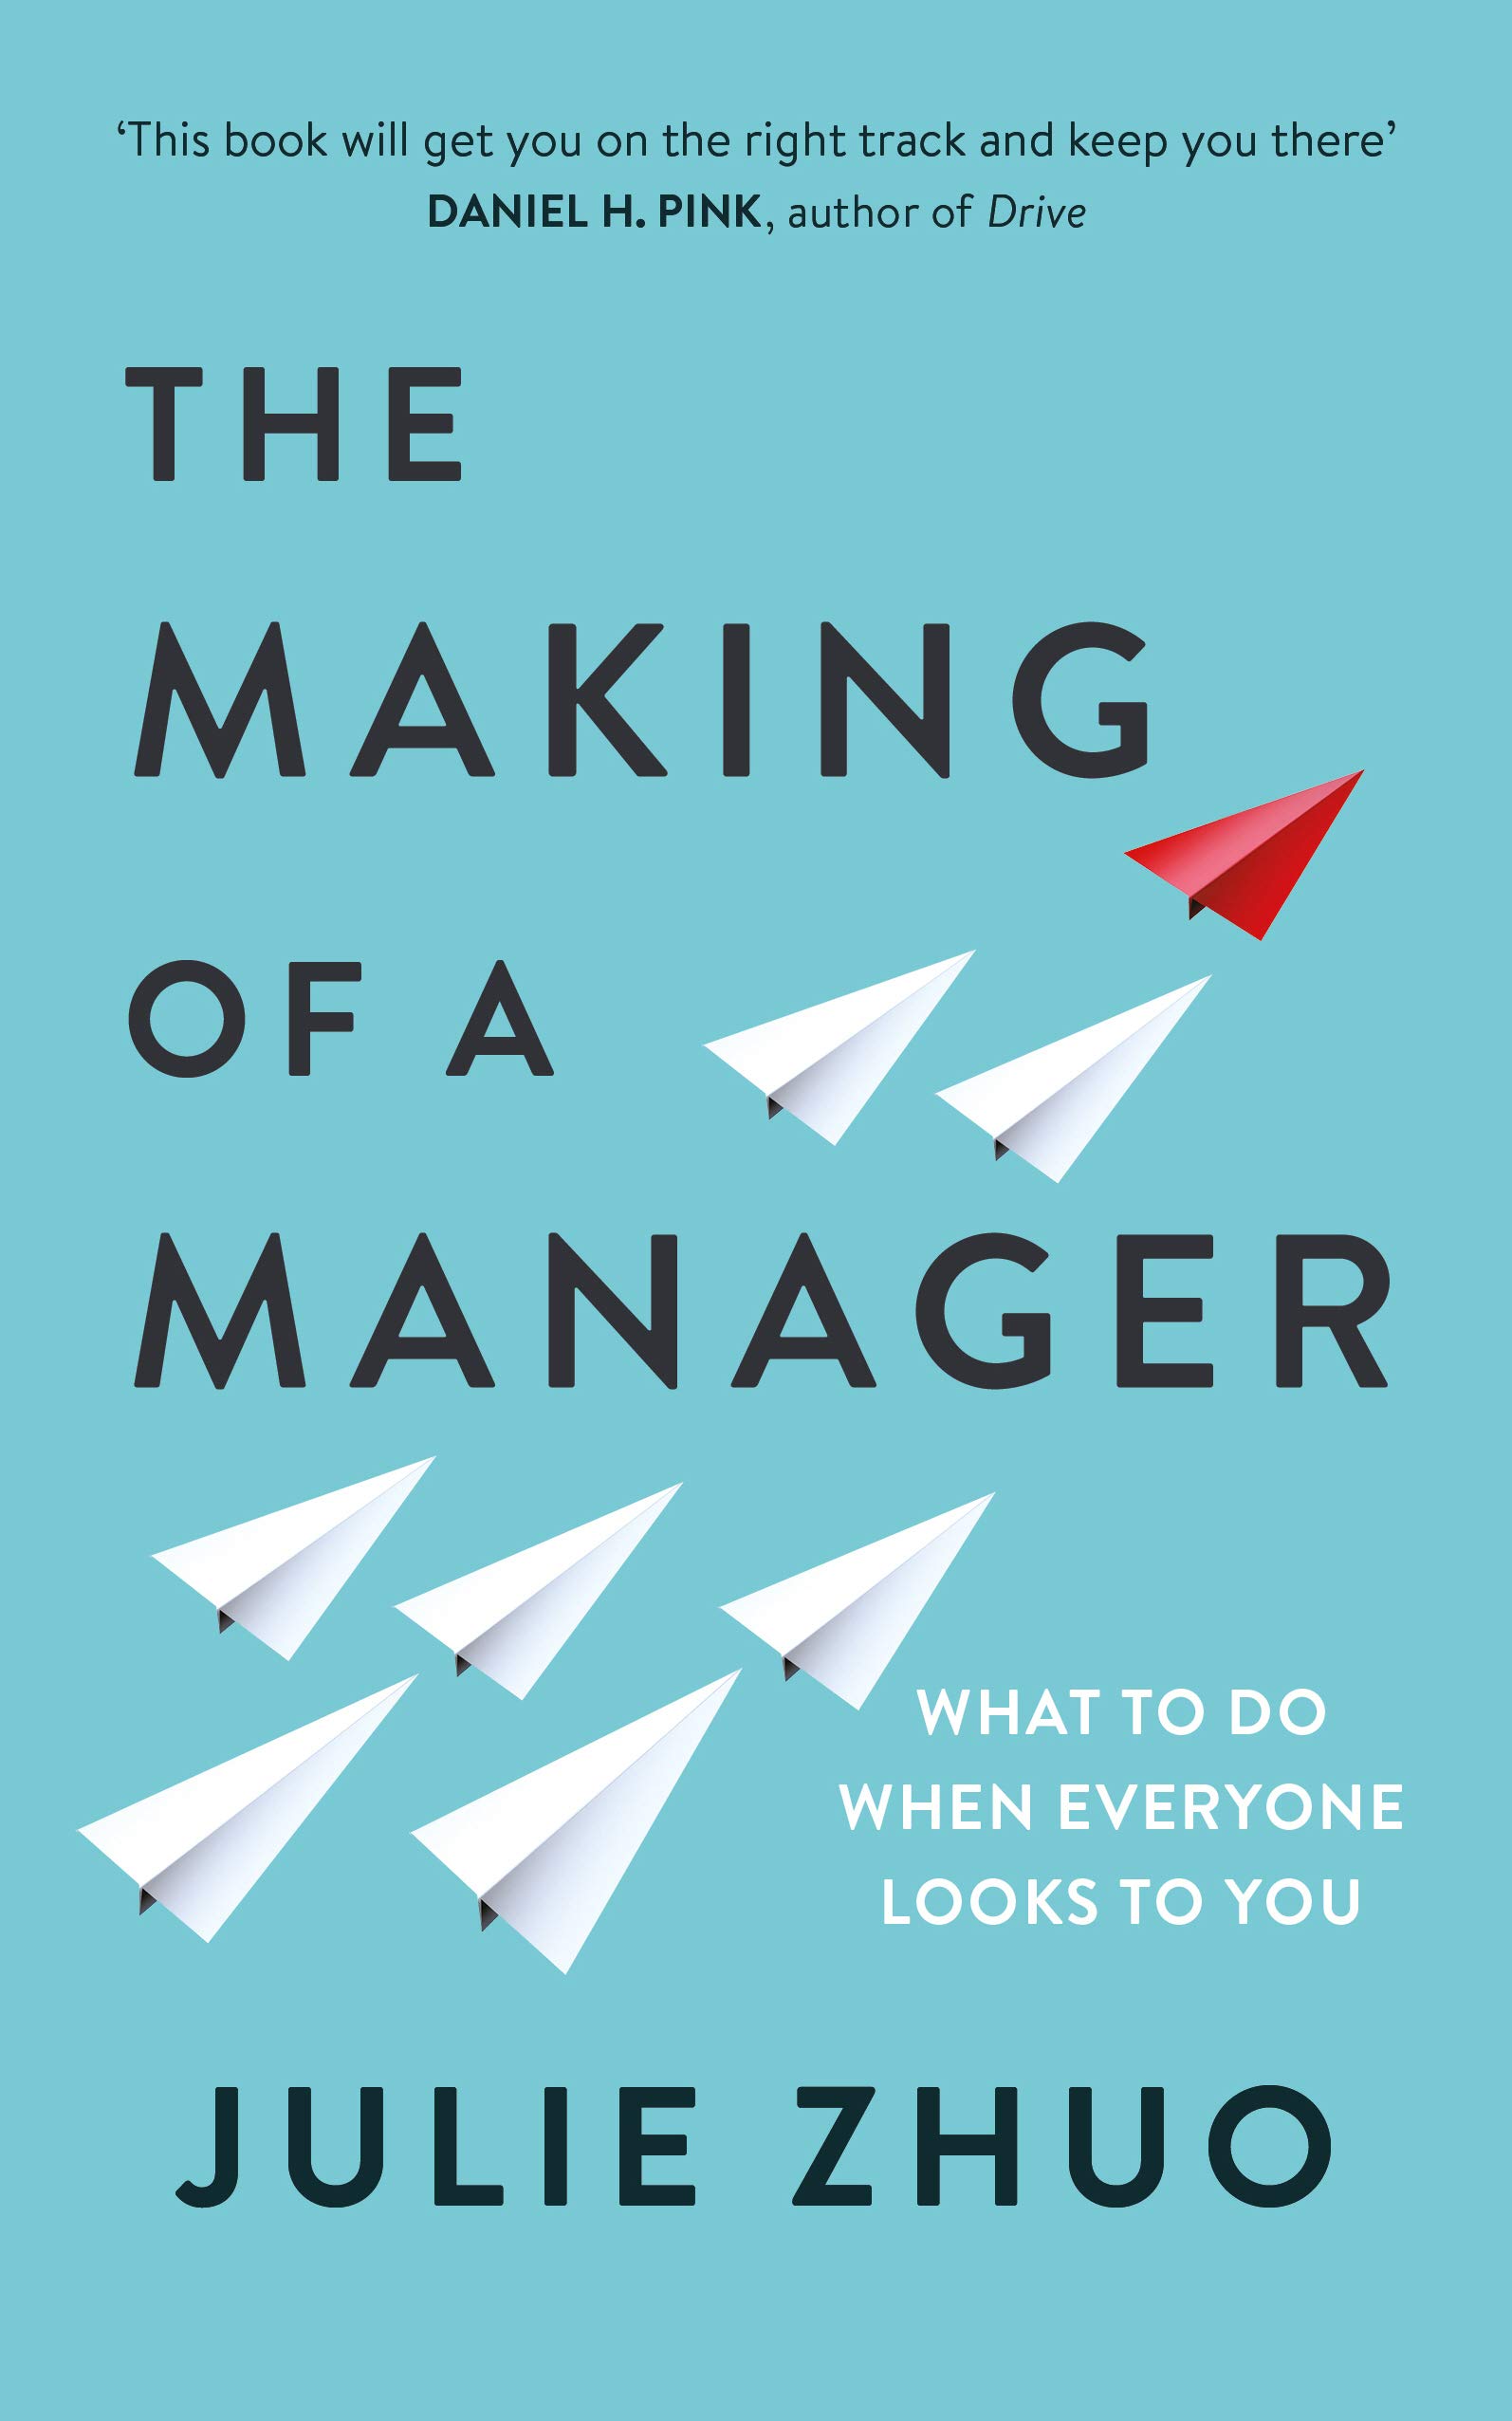 The book cover for Julie Zhou's 'The Making of a Manager: What to Do When Everyone Looks to You'. The cover includes a picture of some paper aeroplanes.